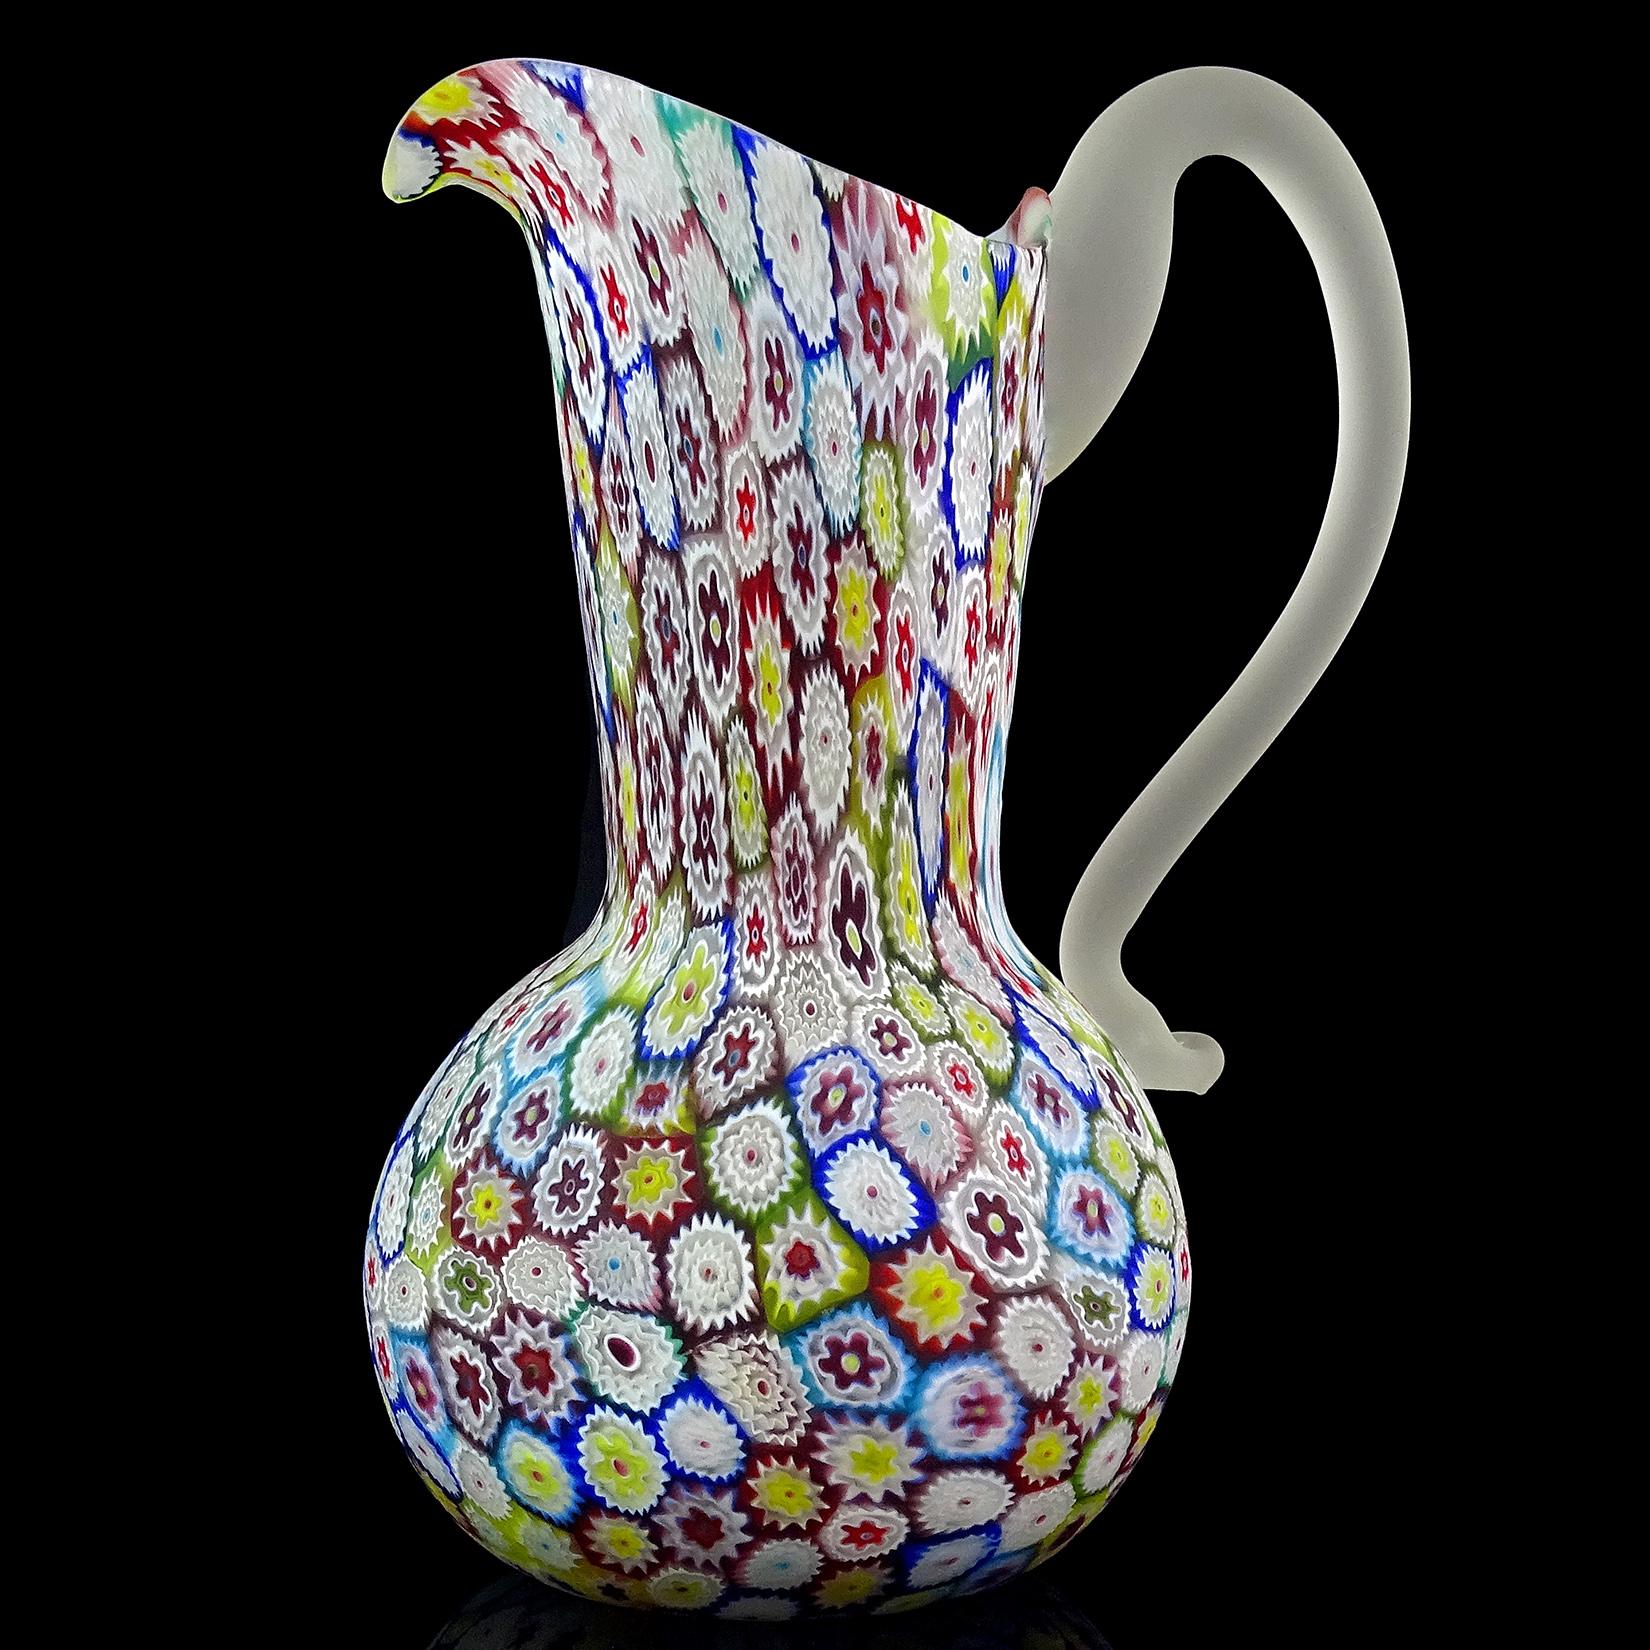 Beautiful vintage Murano hand blown millefiori, rainbow colors, flower mosaic Italian art glass pitcher / vase. Documented to the Fratelli Toso Company. The piece has a great array of colors, with white, cobalt blue, sky blue, green, yellow, bright